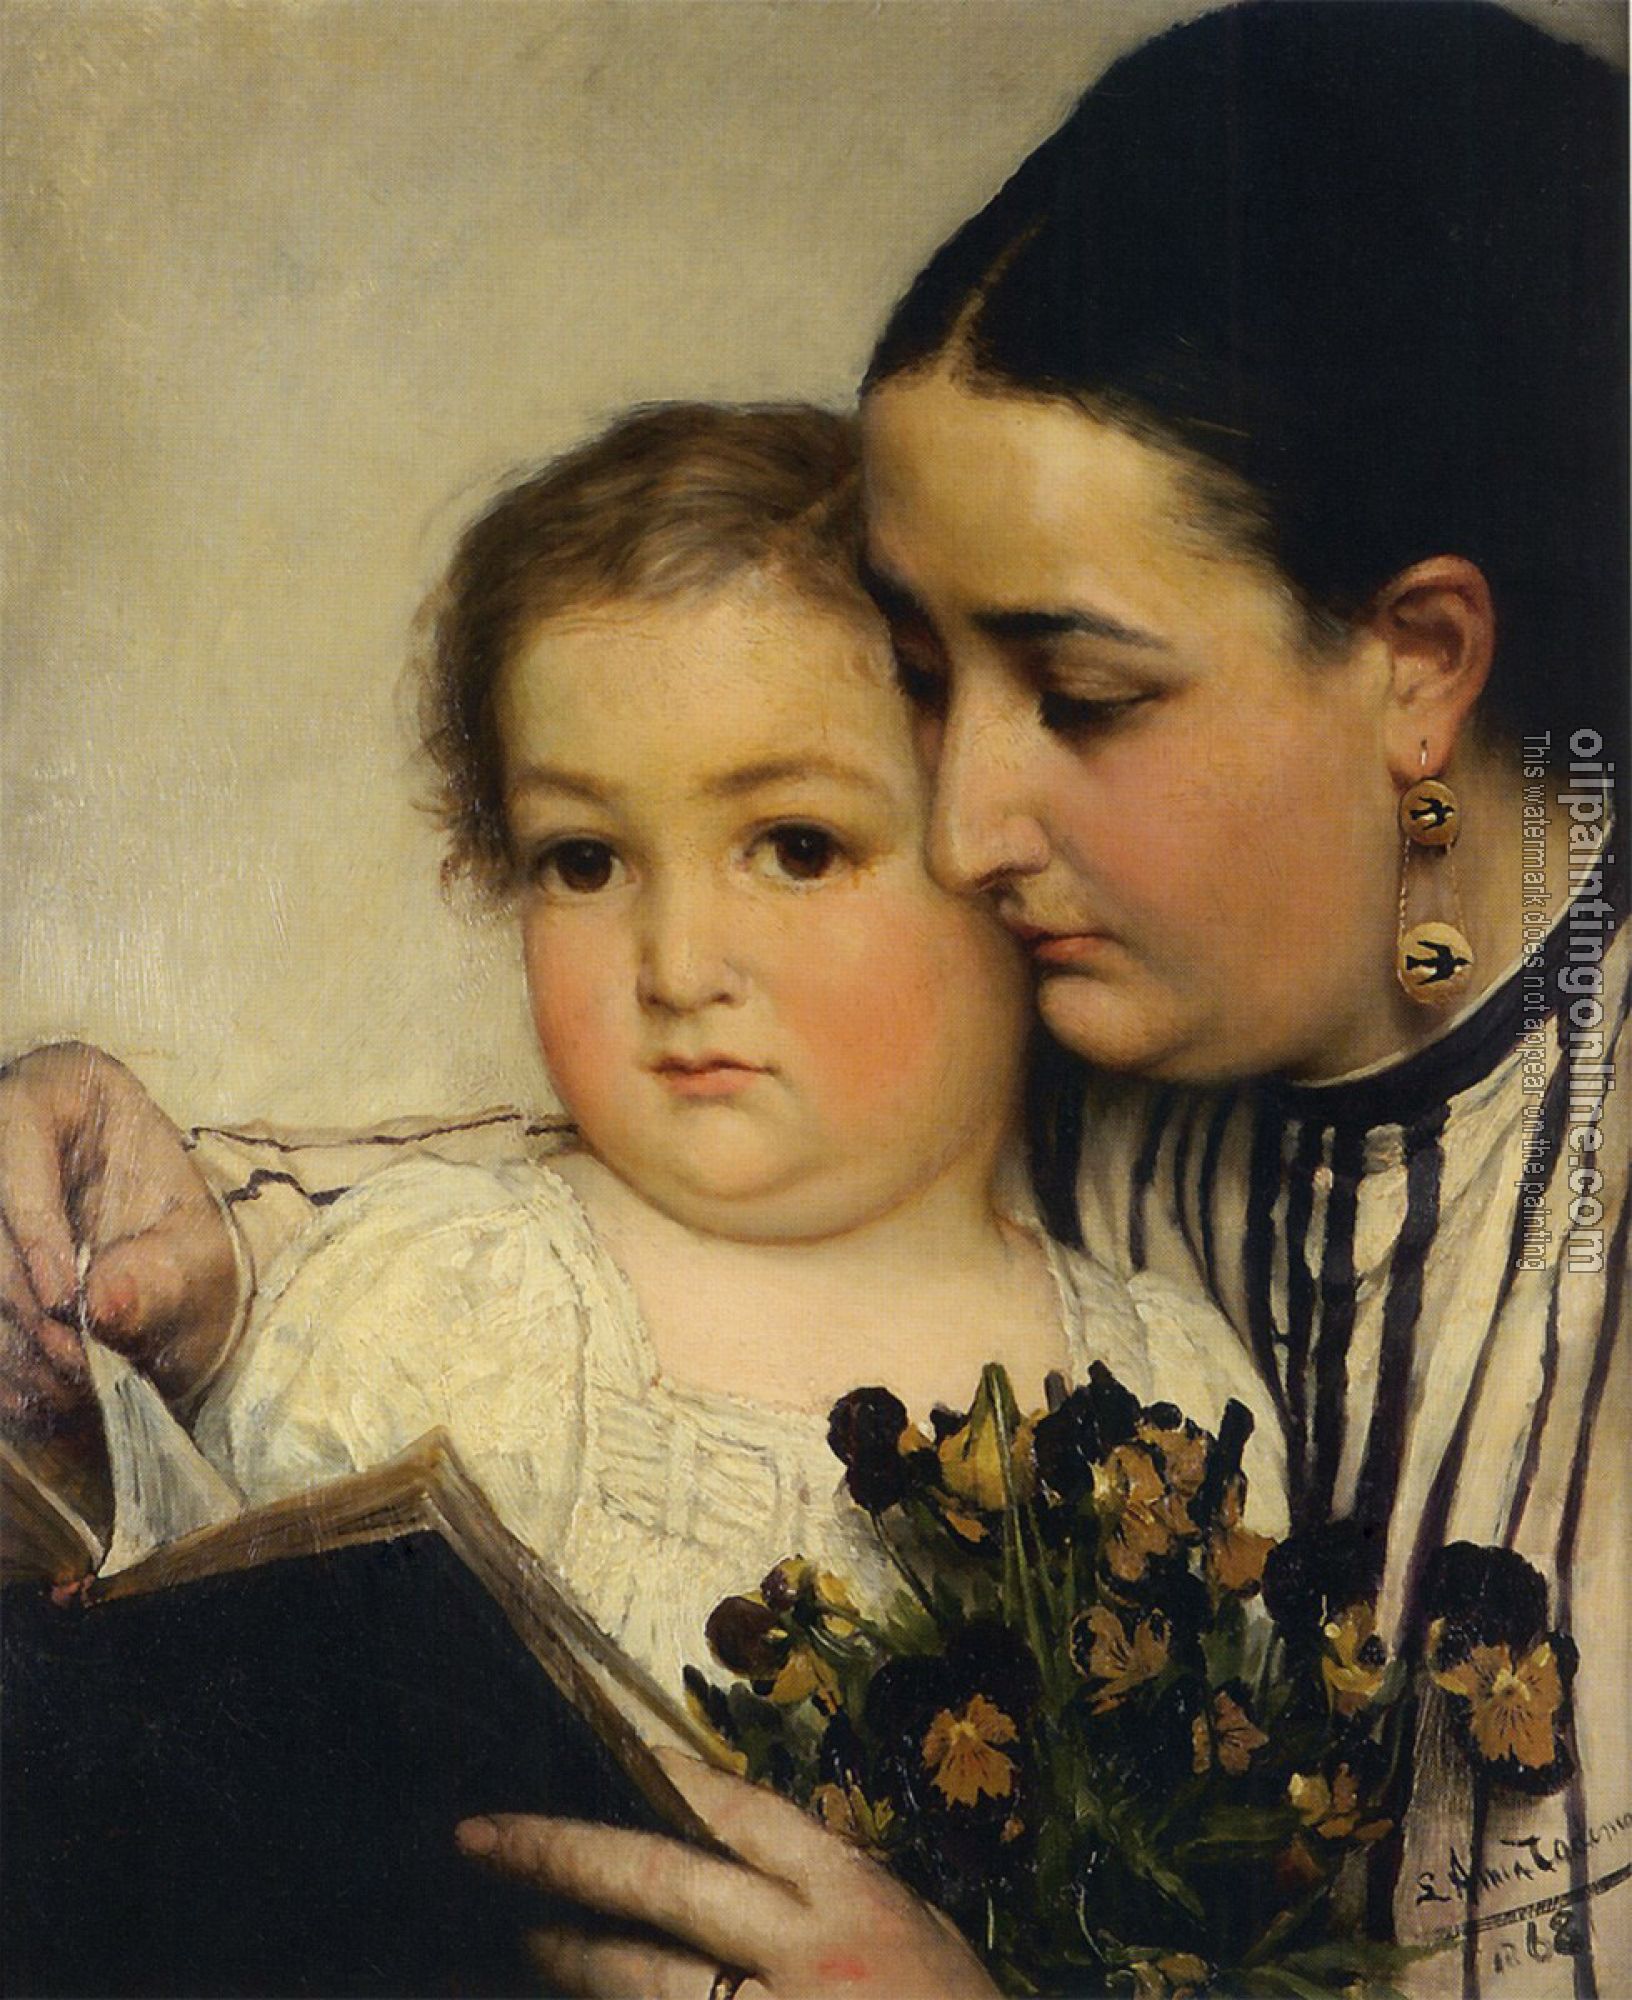 Alma-Tadema, Sir Lawrence - Portrait of Mme Bonnefoy and M. Puttemans